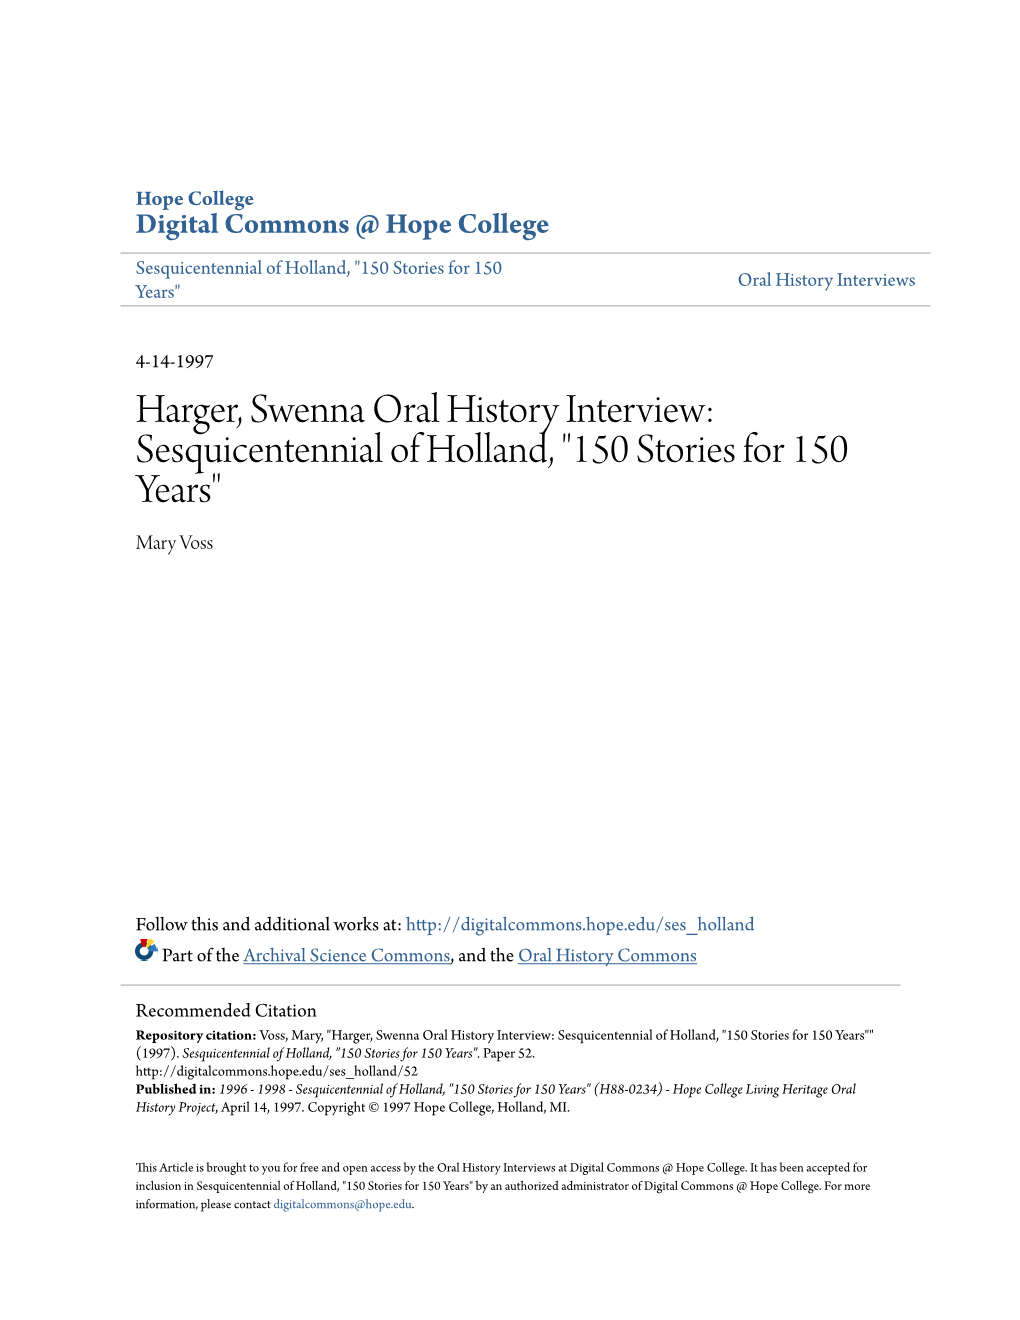 Harger, Swenna Oral History Interview: Sesquicentennial of Holland, "150 Stories for 150 Years" Mary Voss